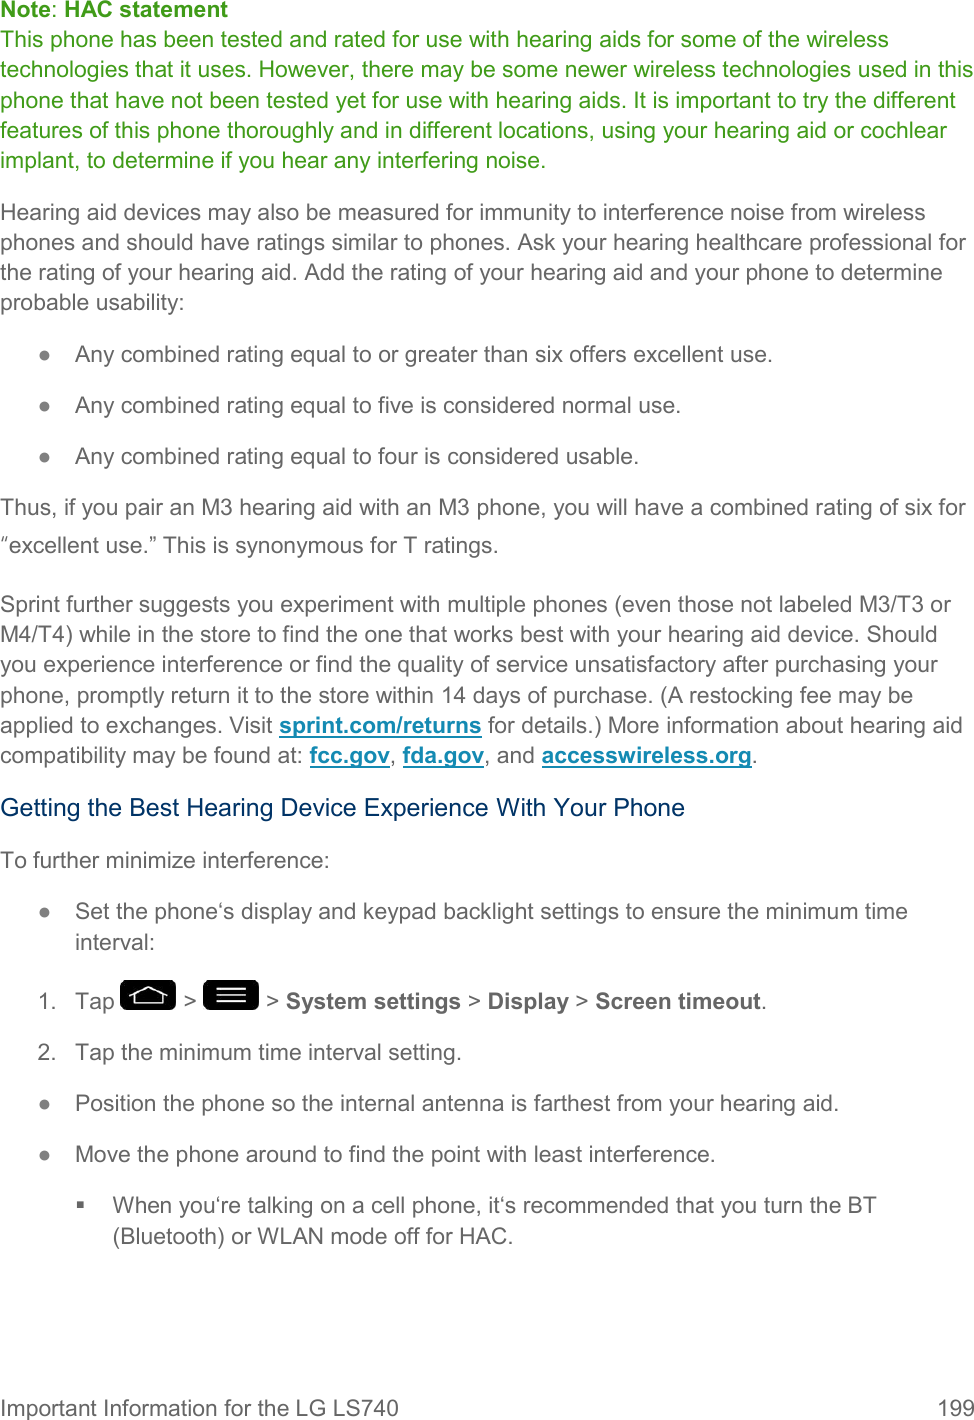 Important Information for the LG LS740  199 Note: HAC statement This phone has been tested and rated for use with hearing aids for some of the wireless technologies that it uses. However, there may be some newer wireless technologies used in this phone that have not been tested yet for use with hearing aids. It is important to try the different features of this phone thoroughly and in different locations, using your hearing aid or cochlear implant, to determine if you hear any interfering noise. Hearing aid devices may also be measured for immunity to interference noise from wireless phones and should have ratings similar to phones. Ask your hearing healthcare professional for the rating of your hearing aid. Add the rating of your hearing aid and your phone to determine probable usability: ●  Any combined rating equal to or greater than six offers excellent use. ●  Any combined rating equal to five is considered normal use. ●  Any combined rating equal to four is considered usable. Thus, if you pair an M3 hearing aid with an M3 phone, you will have a combined rating of six for “excellent use.‖ This is synonymous for T ratings. Sprint further suggests you experiment with multiple phones (even those not labeled M3/T3 or M4/T4) while in the store to find the one that works best with your hearing aid device. Should you experience interference or find the quality of service unsatisfactory after purchasing your phone, promptly return it to the store within 14 days of purchase. (A restocking fee may be applied to exchanges. Visit sprint.com/returns for details.) More information about hearing aid compatibility may be found at: fcc.gov, fda.gov, and accesswireless.org. Getting the Best Hearing Device Experience With Your Phone To further minimize interference: ●  Set the phone‘s display and keypad backlight settings to ensure the minimum time interval: 1.  Tap   &gt;   &gt; System settings &gt; Display &gt; Screen timeout. 2.  Tap the minimum time interval setting. ●  Position the phone so the internal antenna is farthest from your hearing aid. ●  Move the phone around to find the point with least interference.   When you‘re talking on a cell phone, it‘s recommended that you turn the BT (Bluetooth) or WLAN mode off for HAC. 